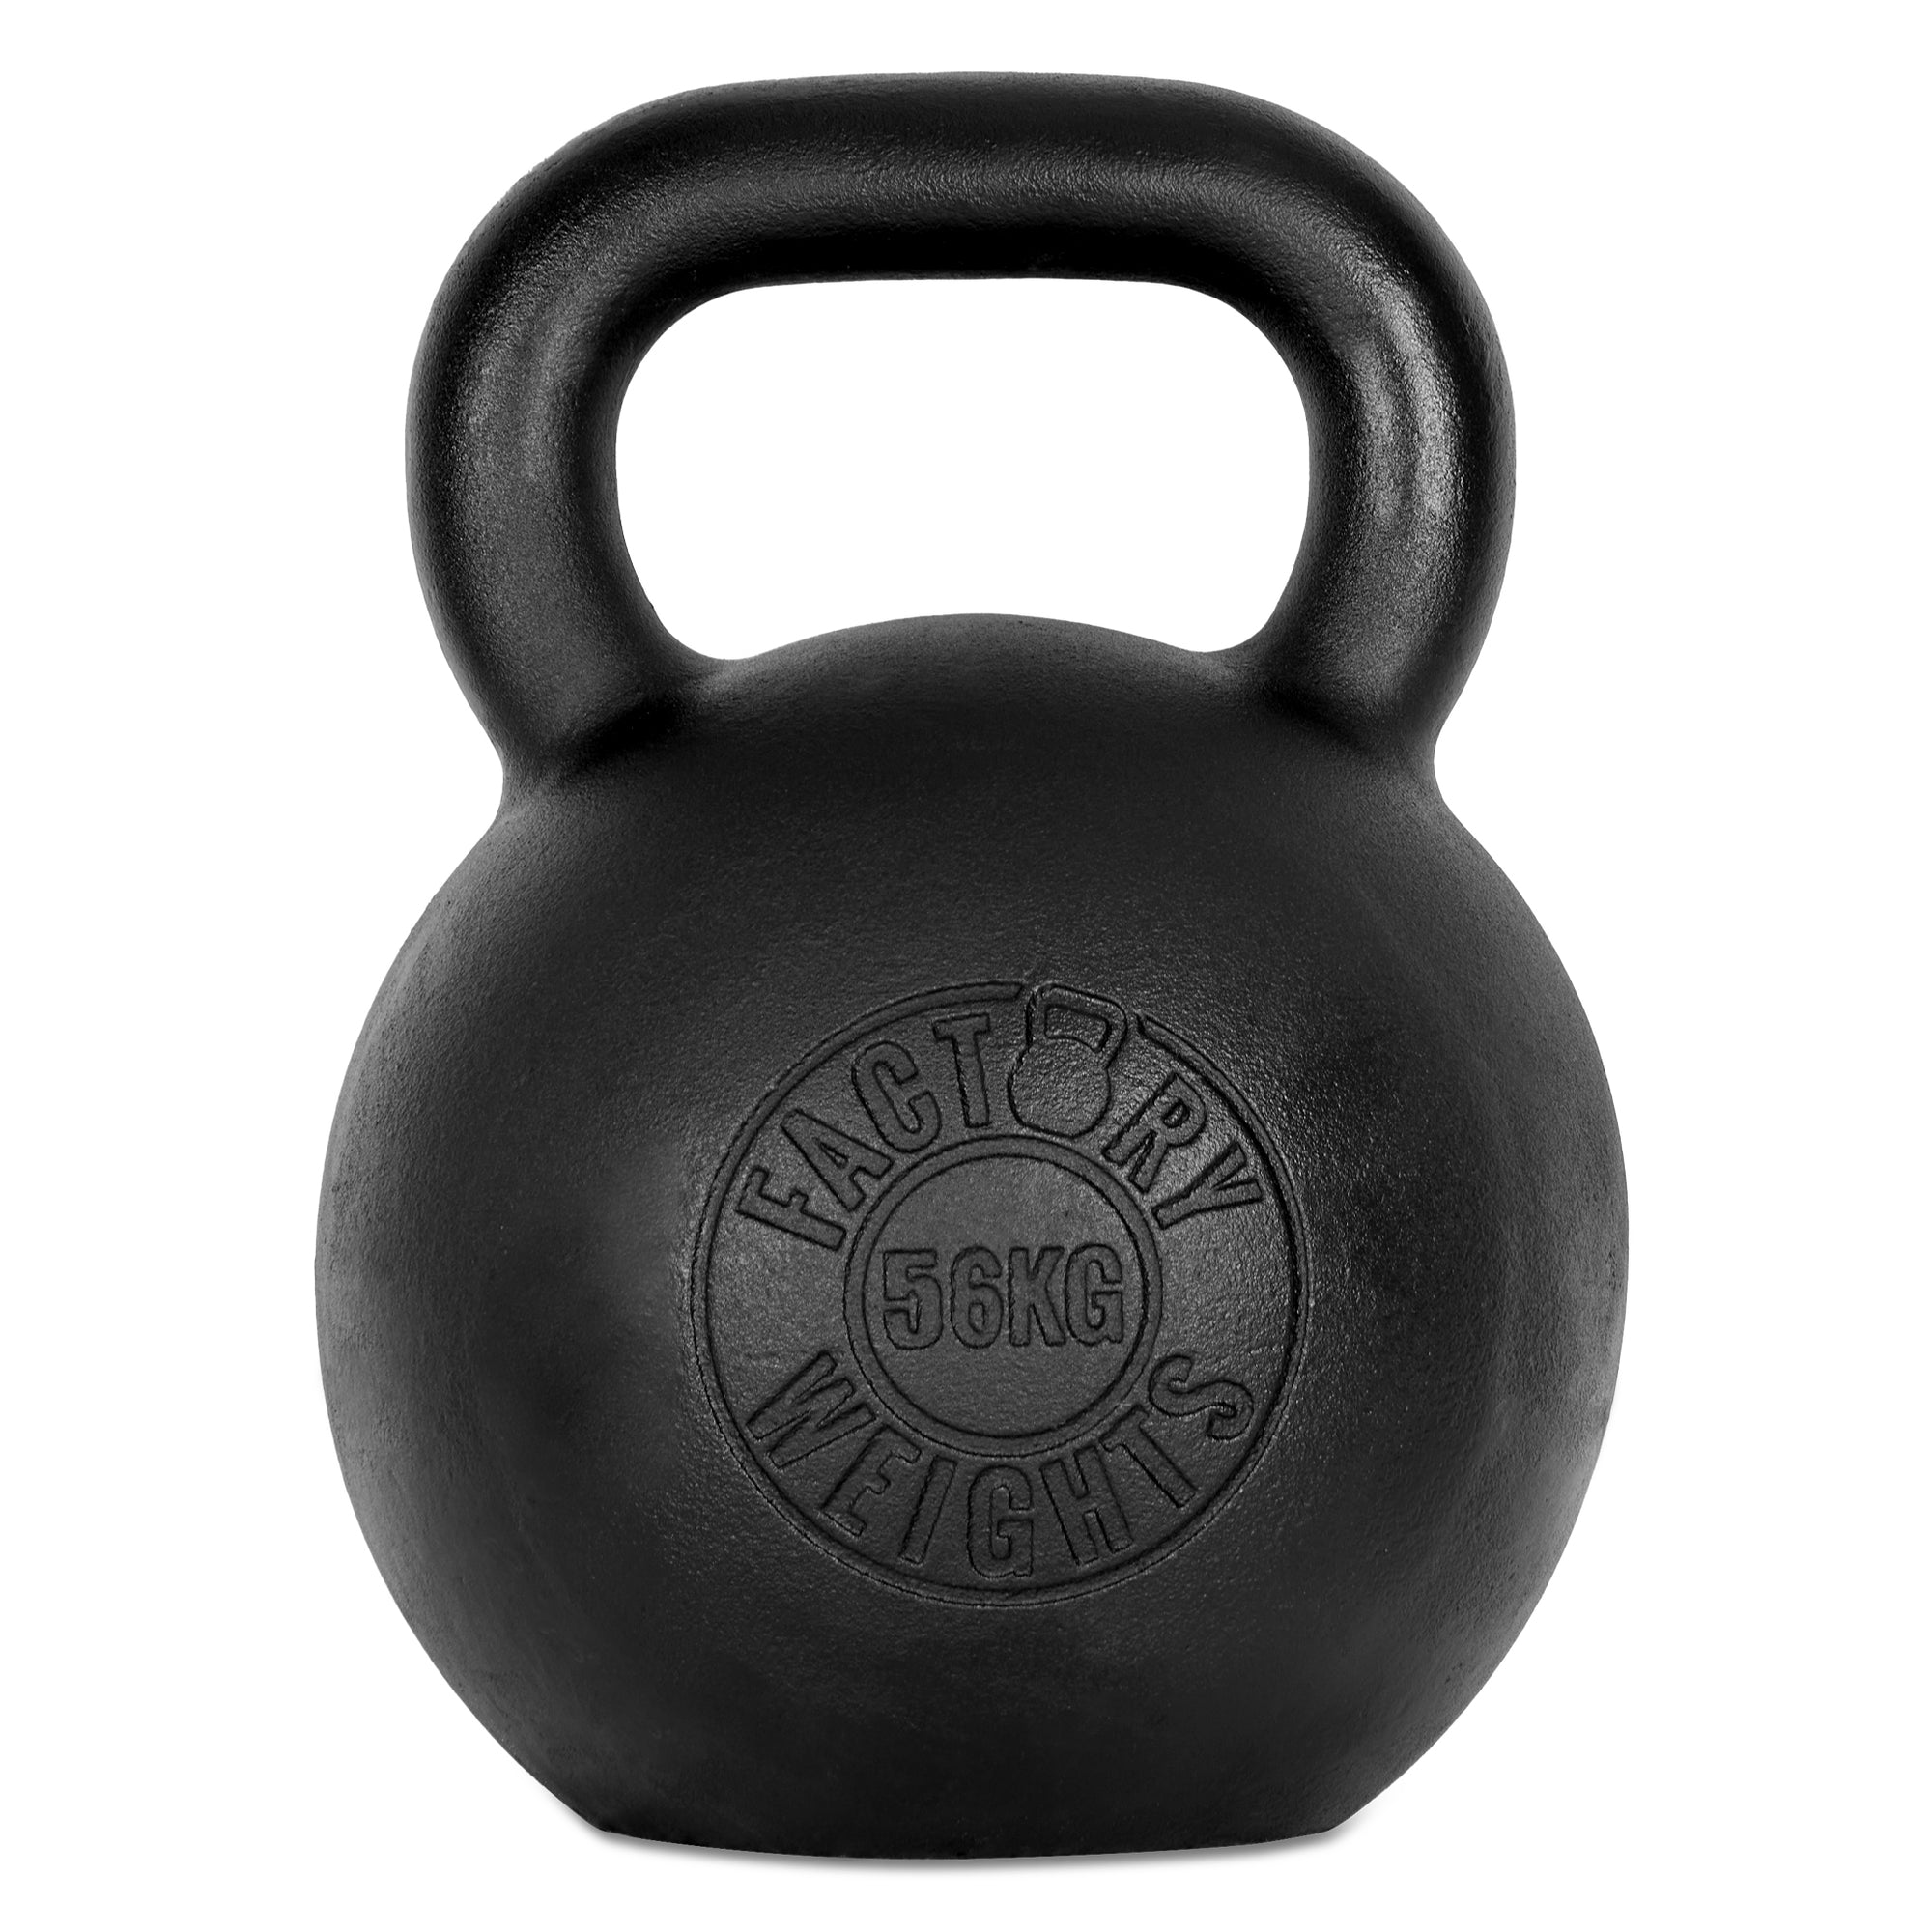 56kg Pro Forged Kettlebell